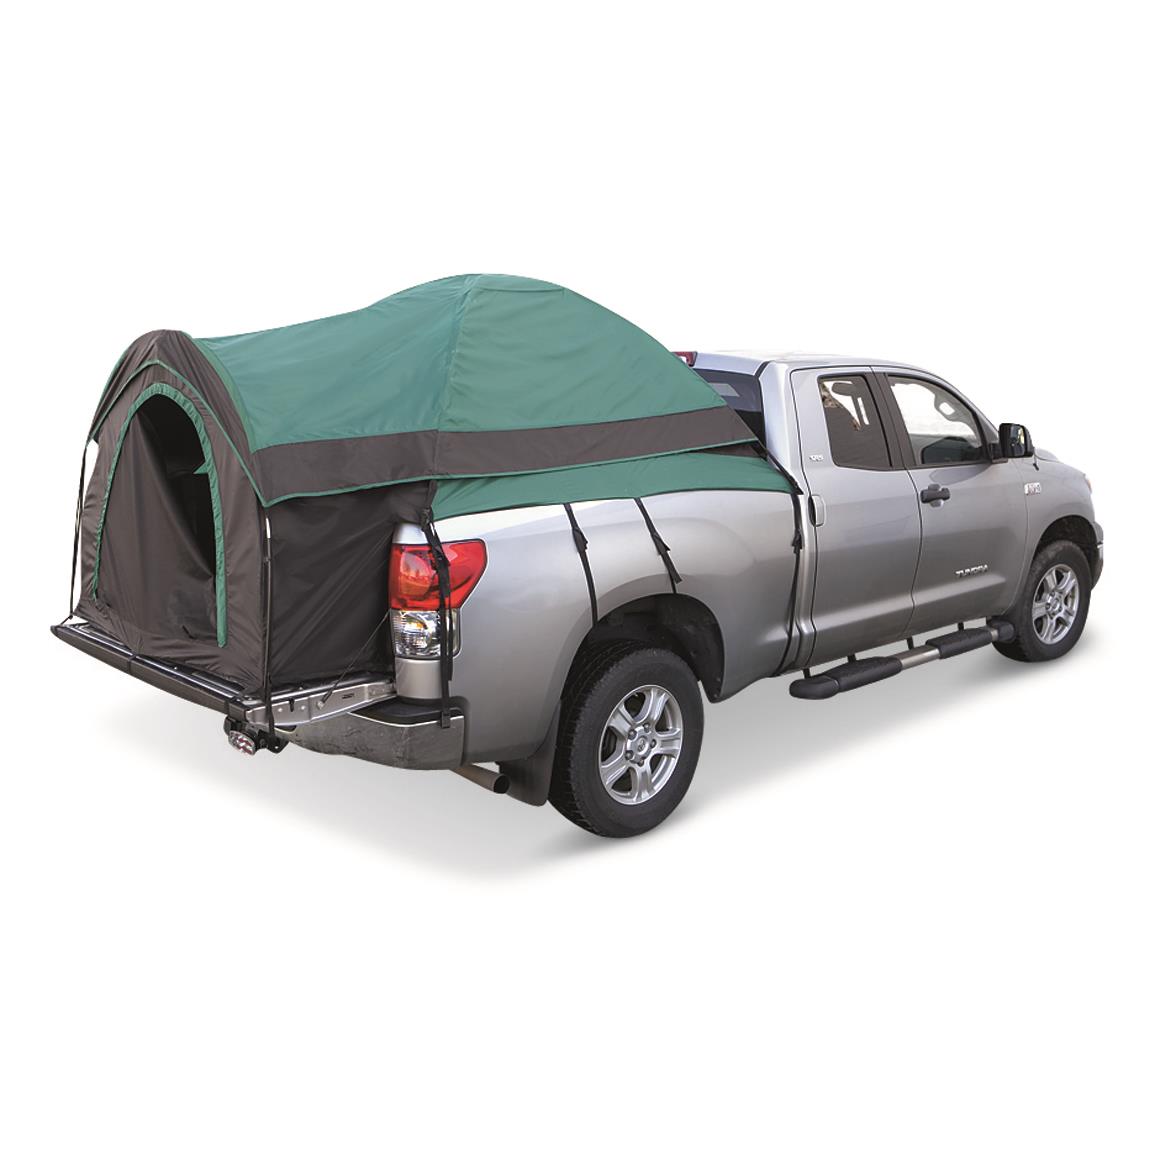 Pick Up Truck Bed Camping Tent 1500mm Water-Resistant Sleeps 2 Fits Beds 72-74" 